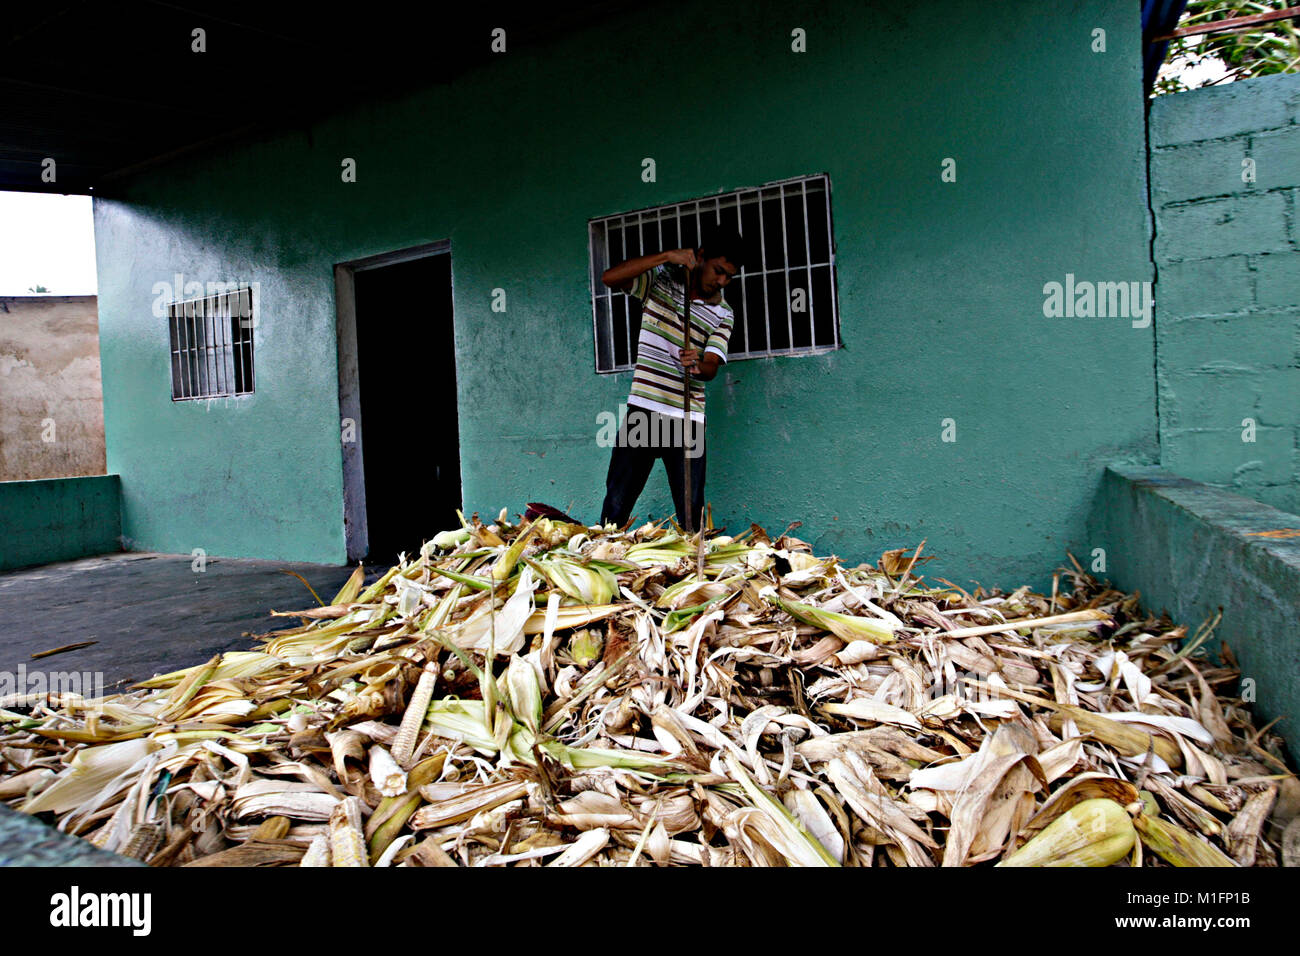 Maturin, Monagas, Venezuela. 8th Dec, 2012. december 09, 2012. A young man sweeps the leaves and corn after peeling the corn to make the cachapas dough, in the city of Matur'n, Monagas state, Venezuela.foto: Juan Carlos Hernandez Credit: Juan Carlos Hernandez/ZUMA Wire/Alamy Live News Stock Photo